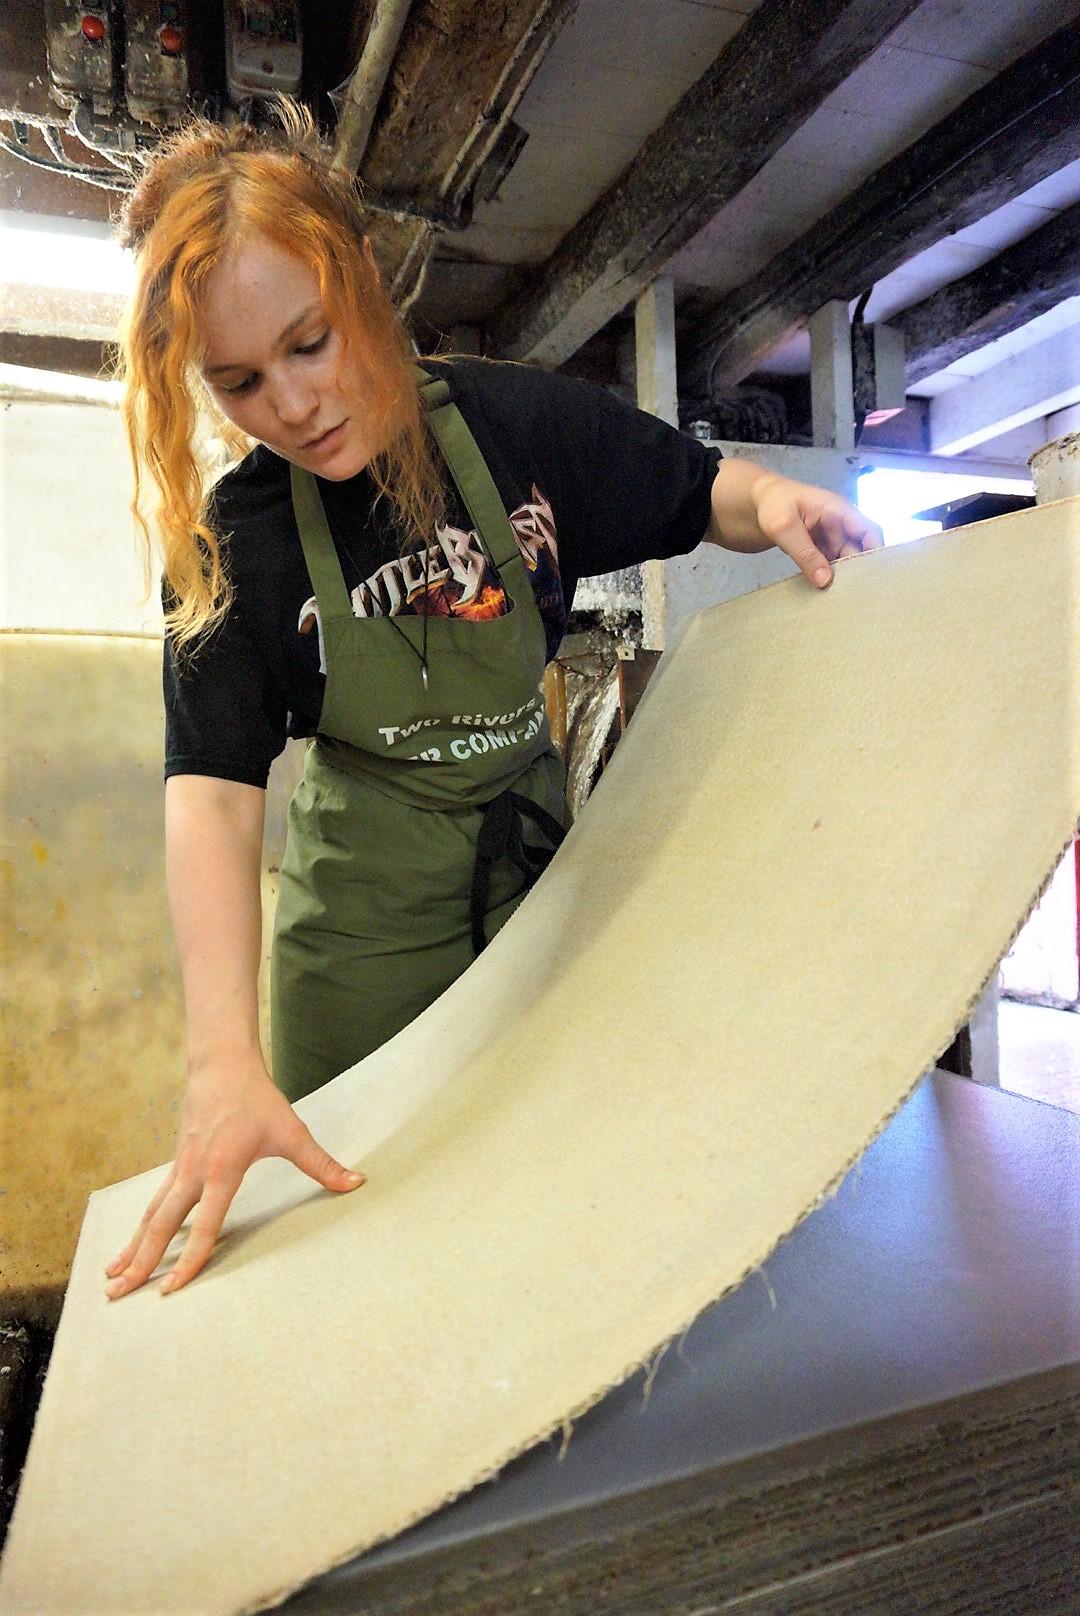 Apprentice Zoe Collis is learning the trade of commercial papermaking at Two Rivers Paper in Somerset, England. Commercial papermaking is a critically endangered craft. (Alison Jane Hoare)